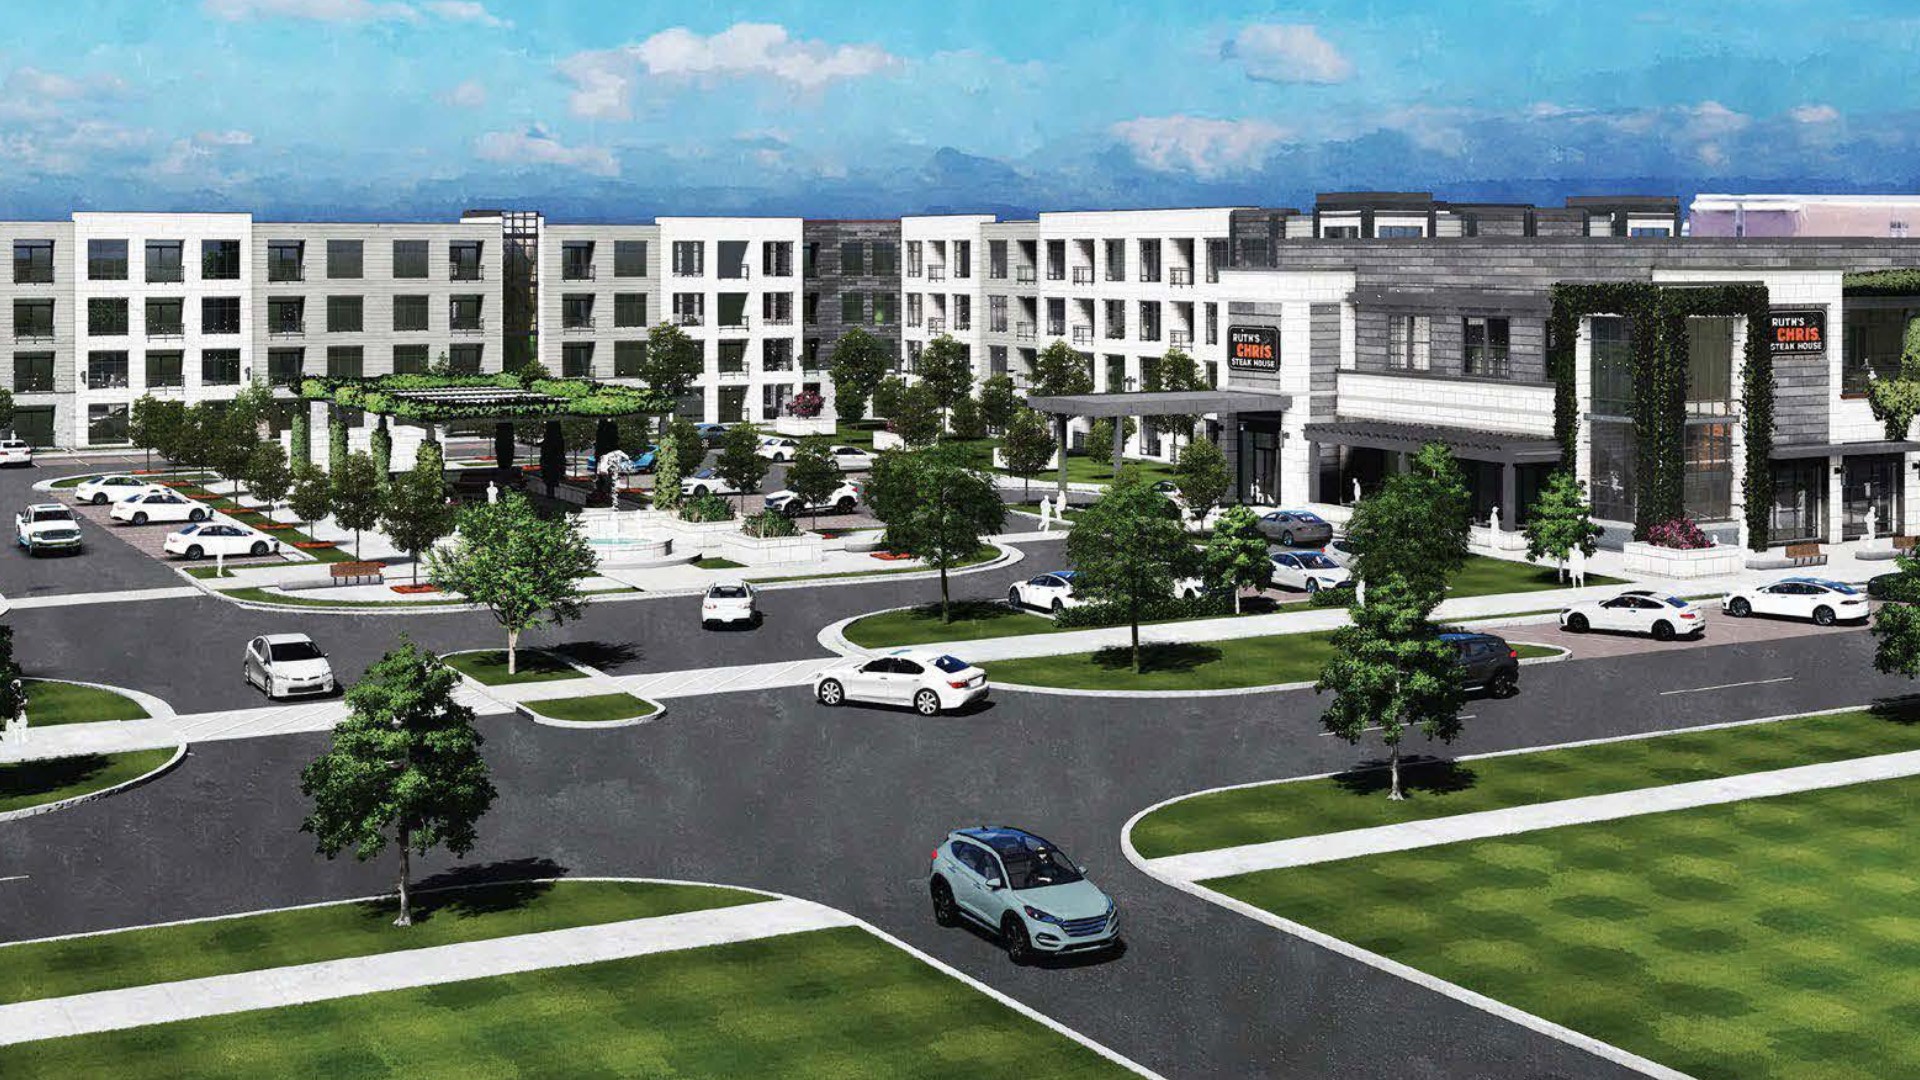 The project will include luxury apartments as well as a two-story Ruth's Chris Steakhouse.